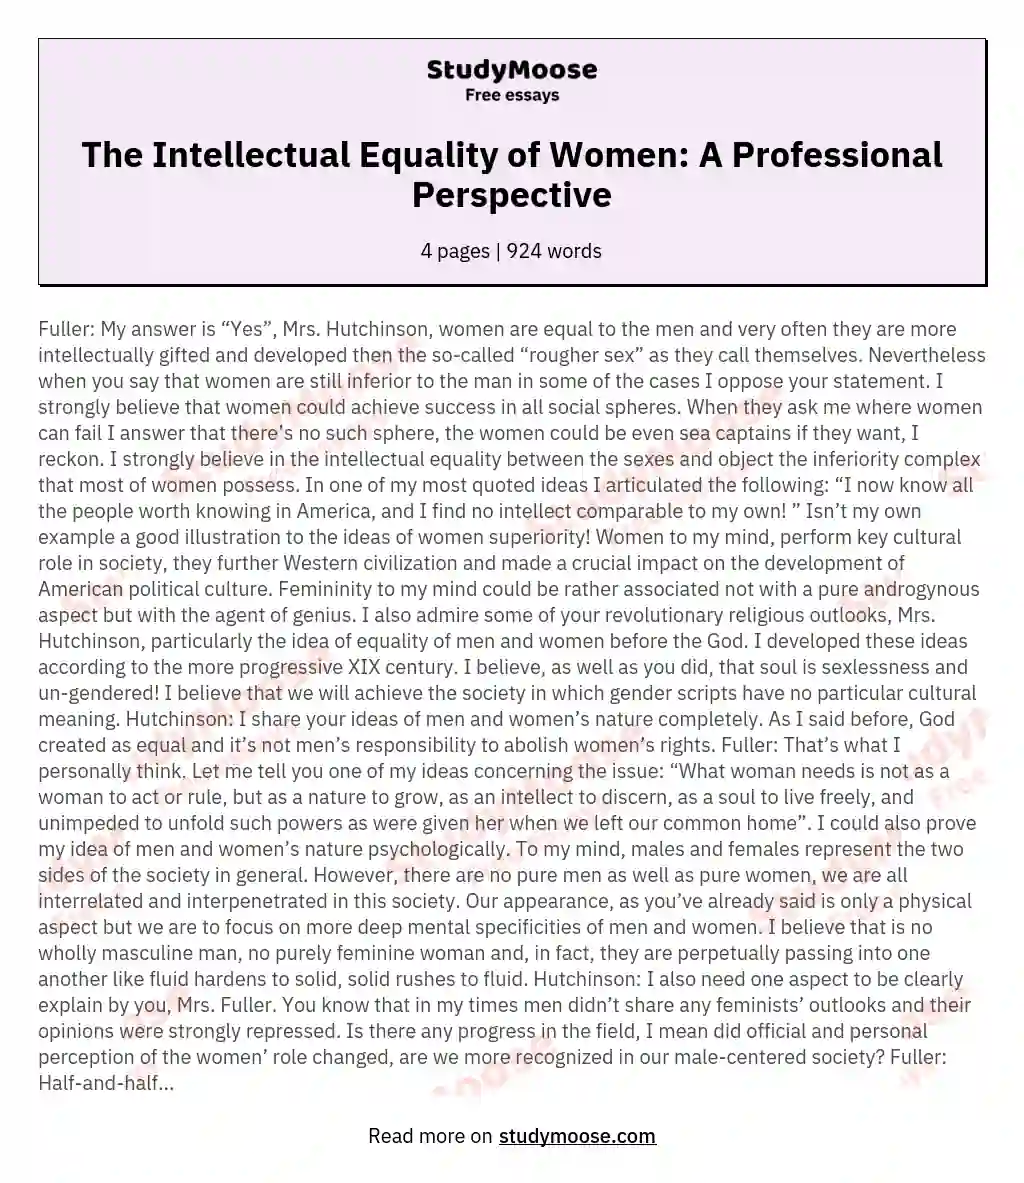 The Intellectual Equality of Women: A Professional Perspective essay